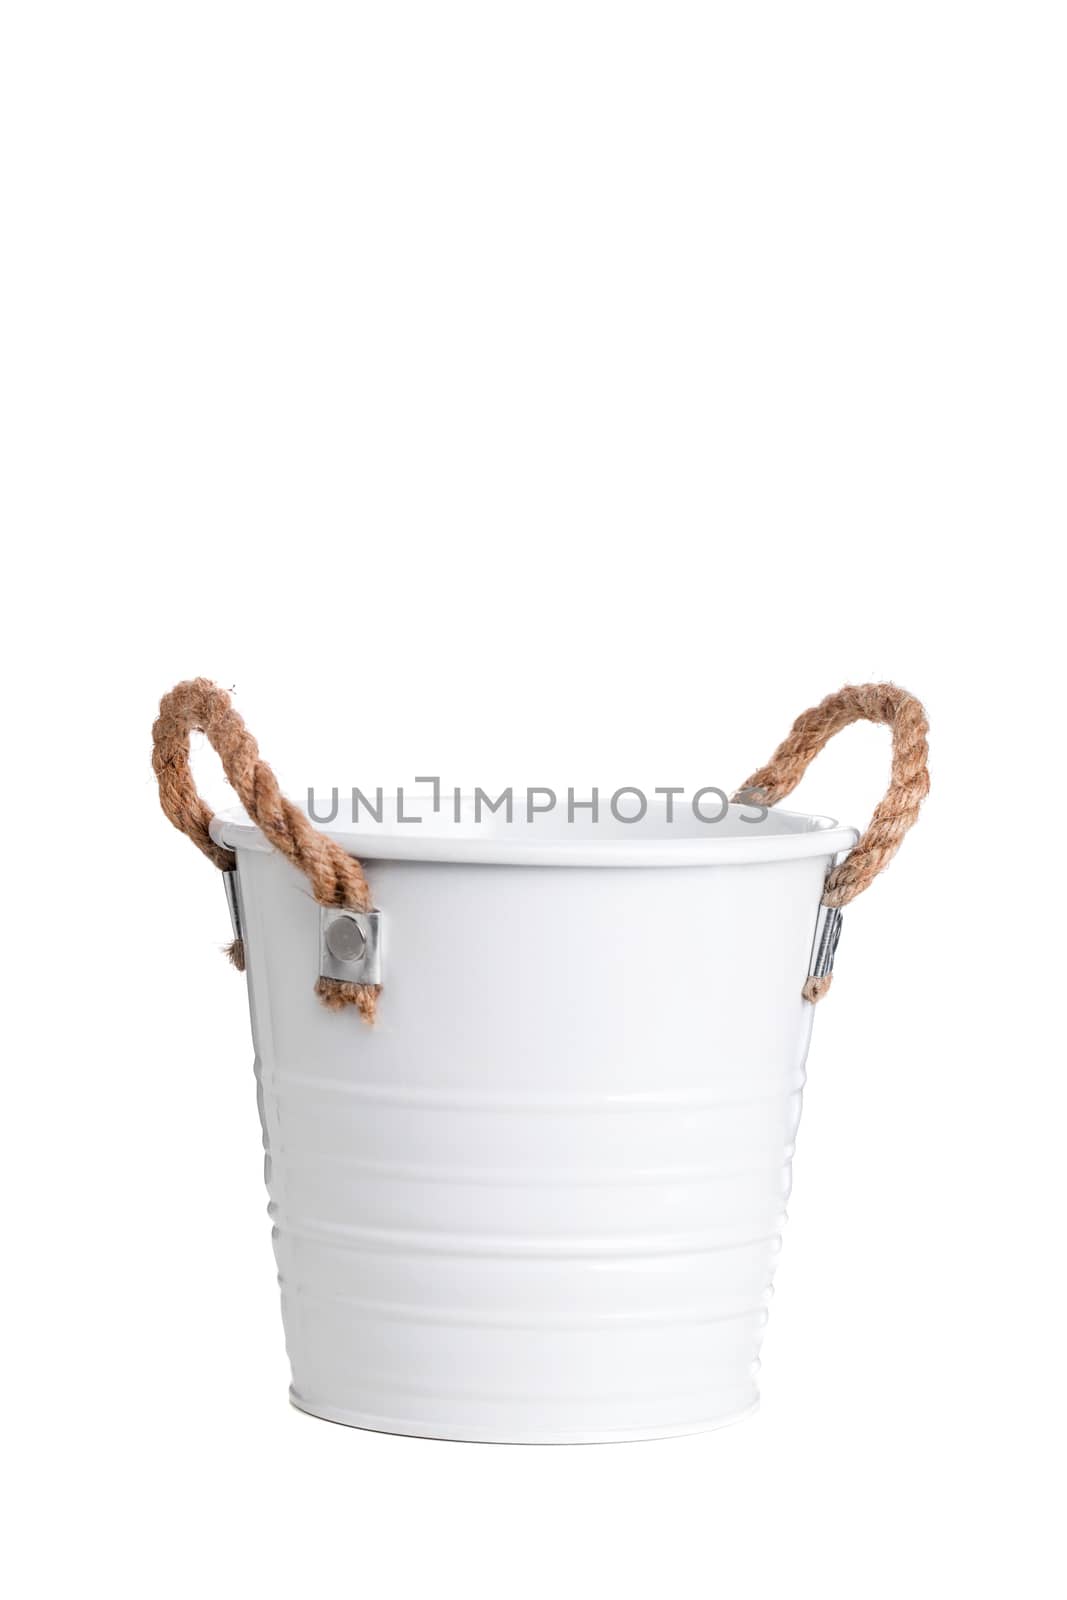 small white bucket with rope handles, isolated on white background